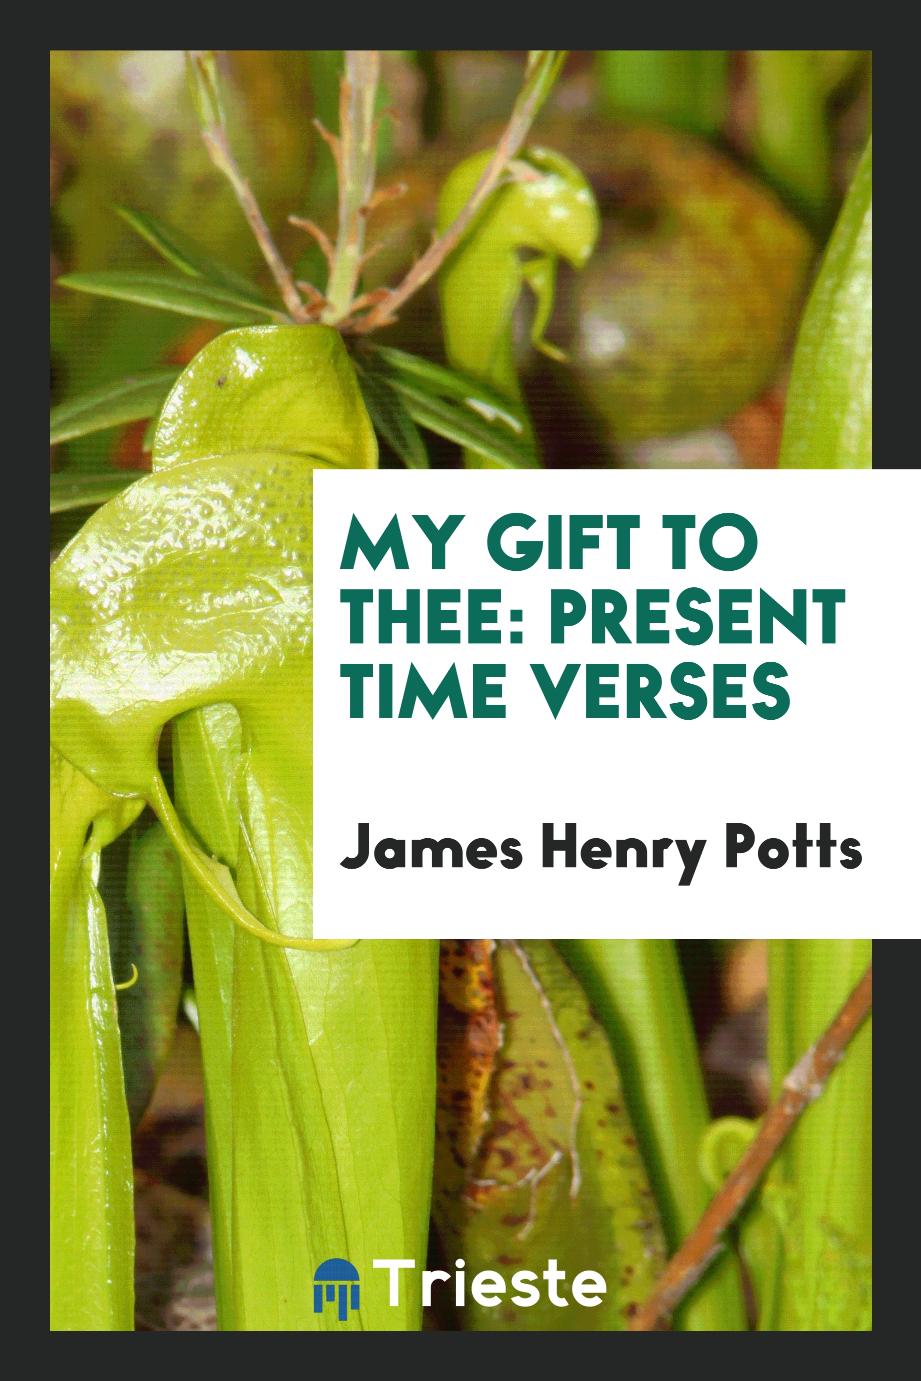 My Gift to Thee: Present Time Verses